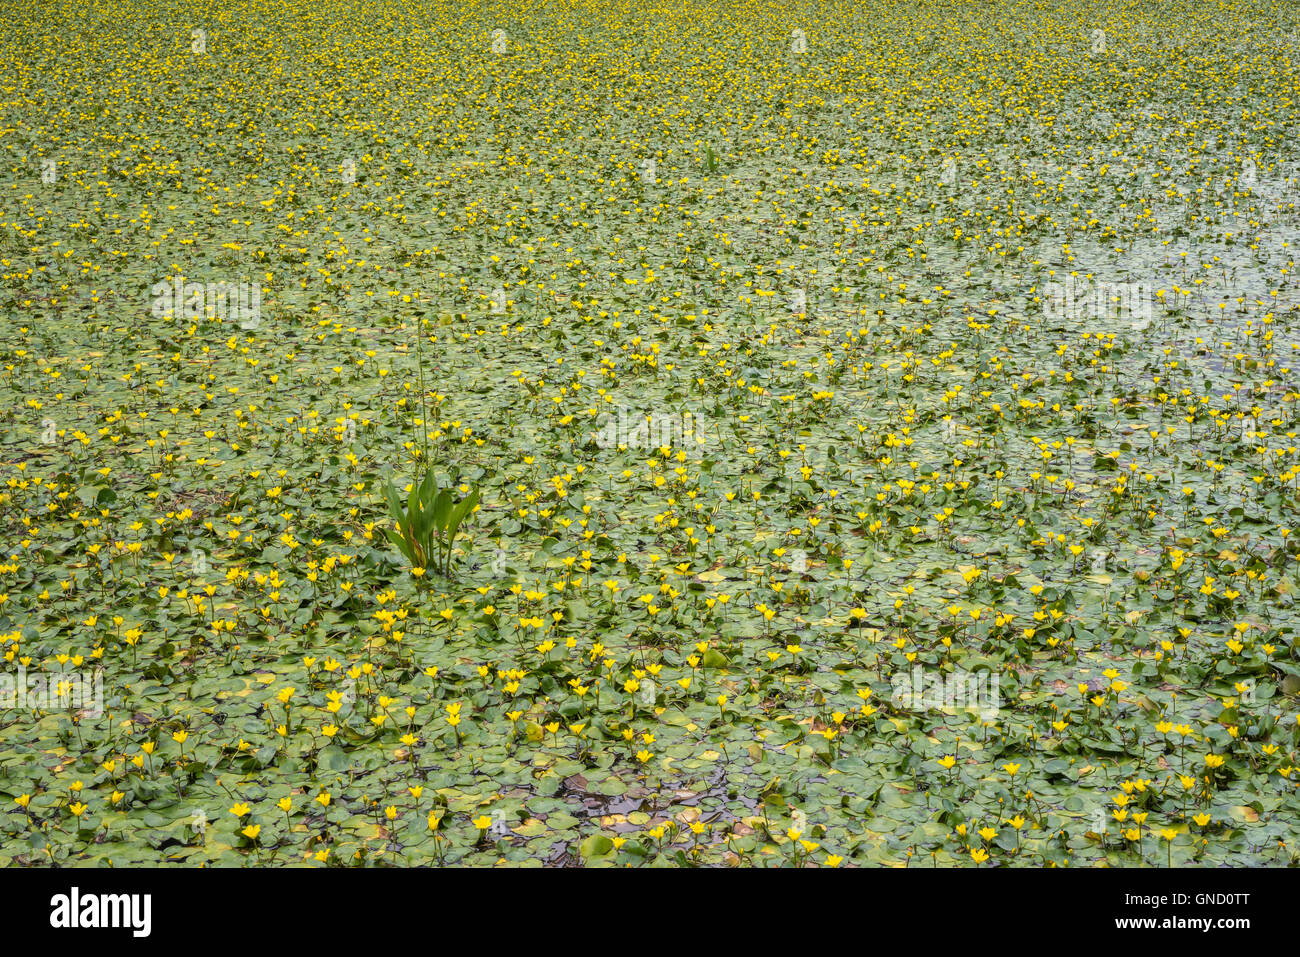 A Single Invasive Plant Grows in a Bed of Thousands of Miniature, Yellow Water Lilies Stock Photo